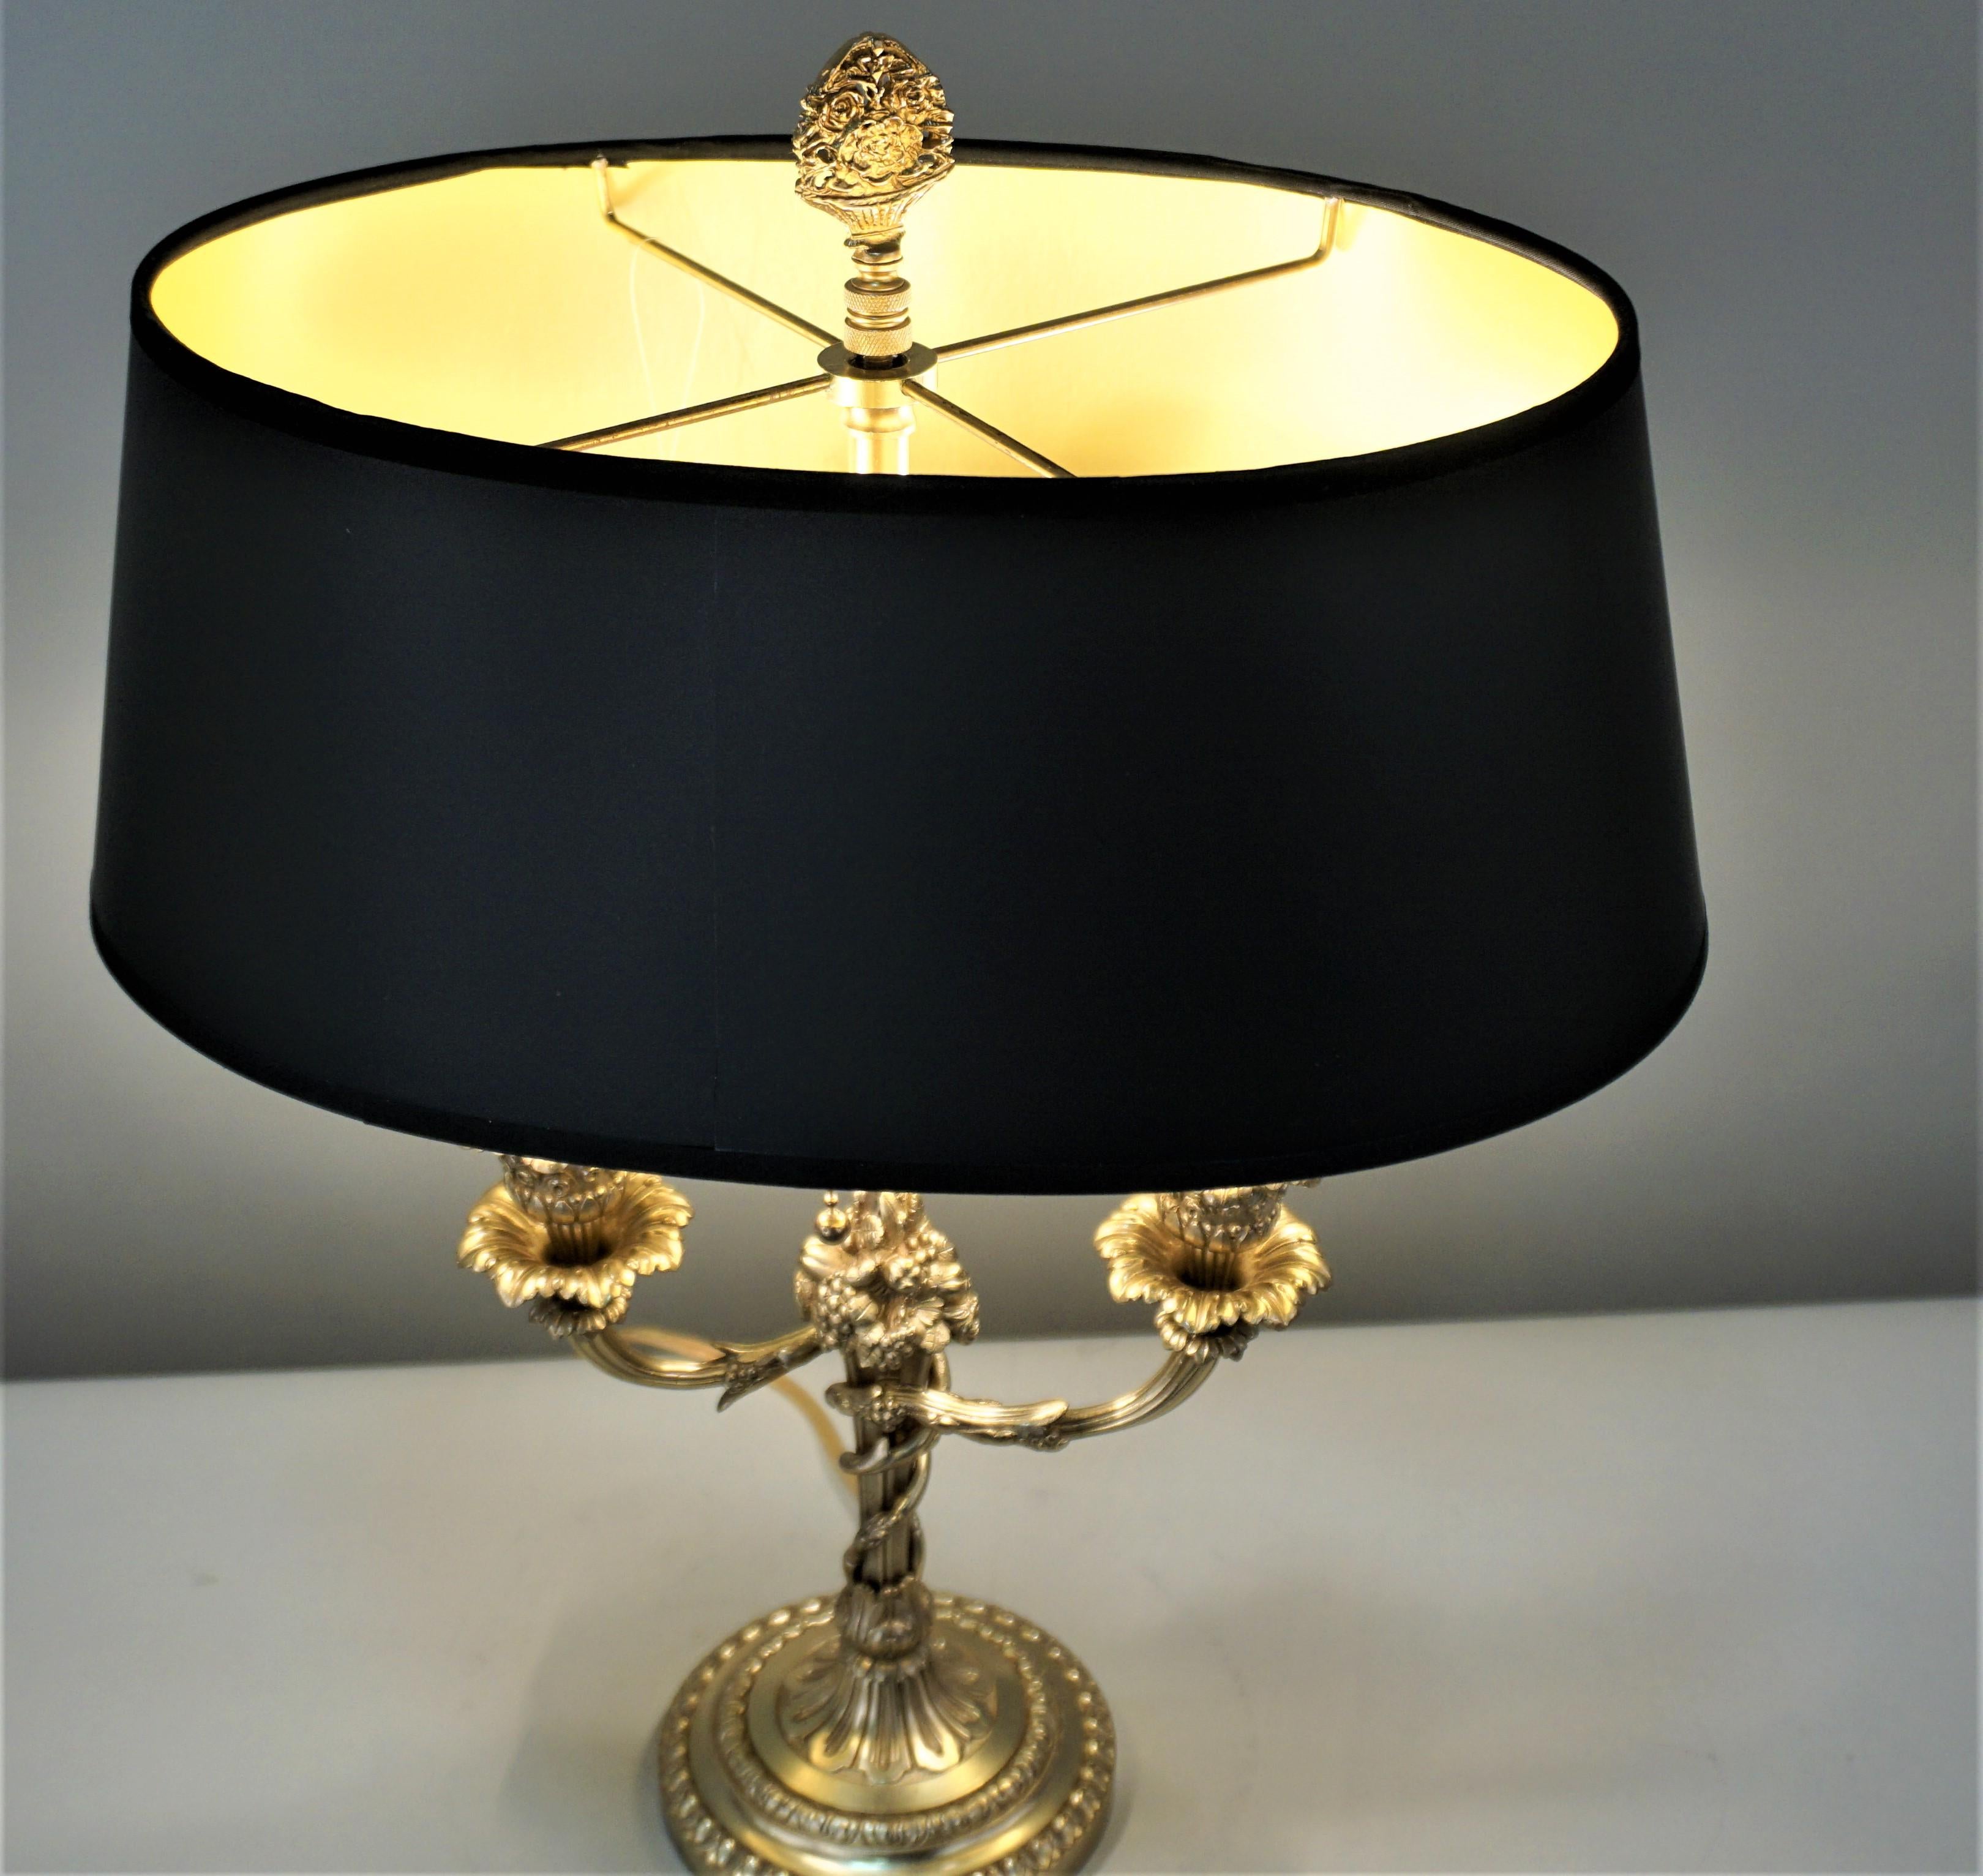 Beautiful 19th century French bronze candelabrum that has been electrified as a table or desk lamp and fitted with oval black gold lining lampshade.
2 pull chain socket.